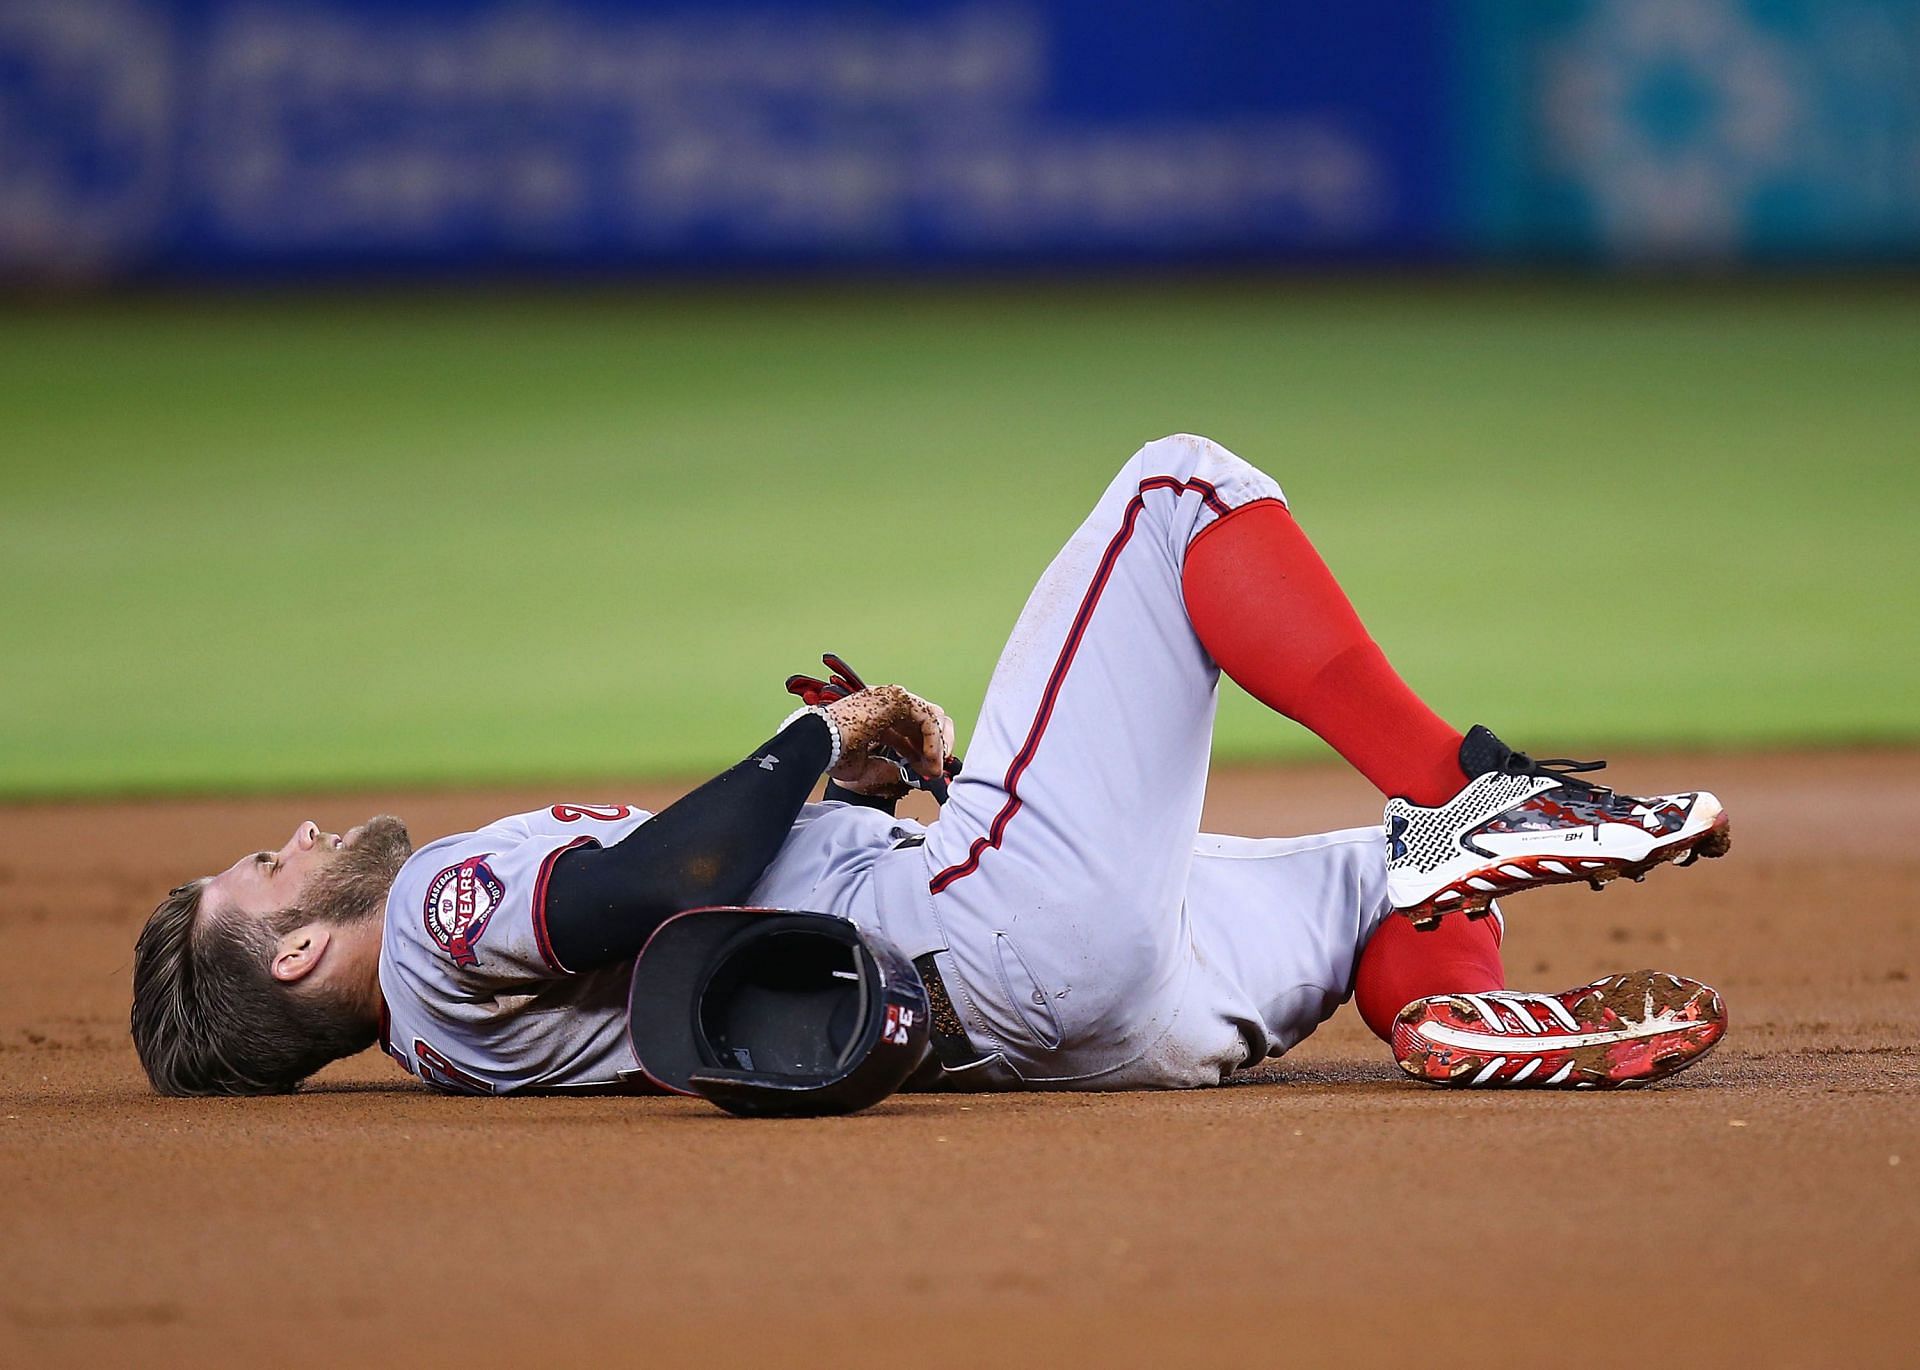 Bryce Harper of the Philadelphia Phillies after colliding with Miguel Rojas of the Miami Marlins